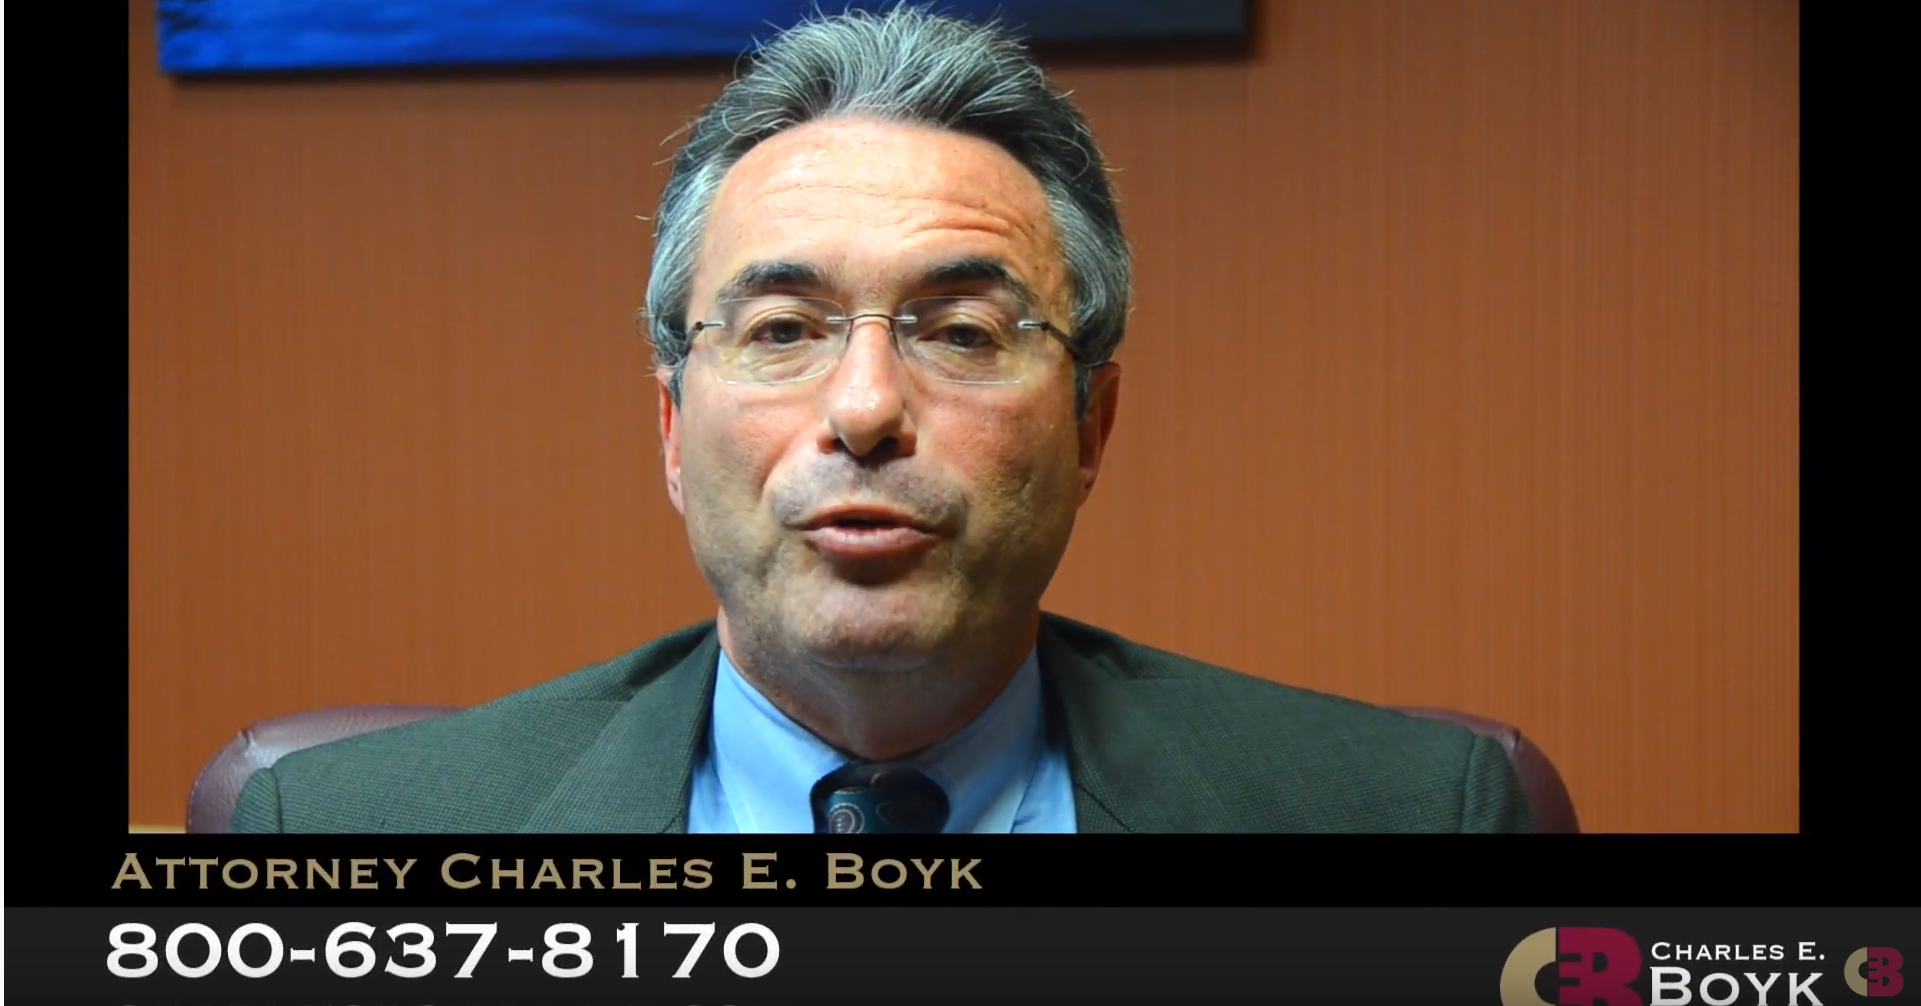 Charles BOyk sitting and speaking and a footer with his name and phone number